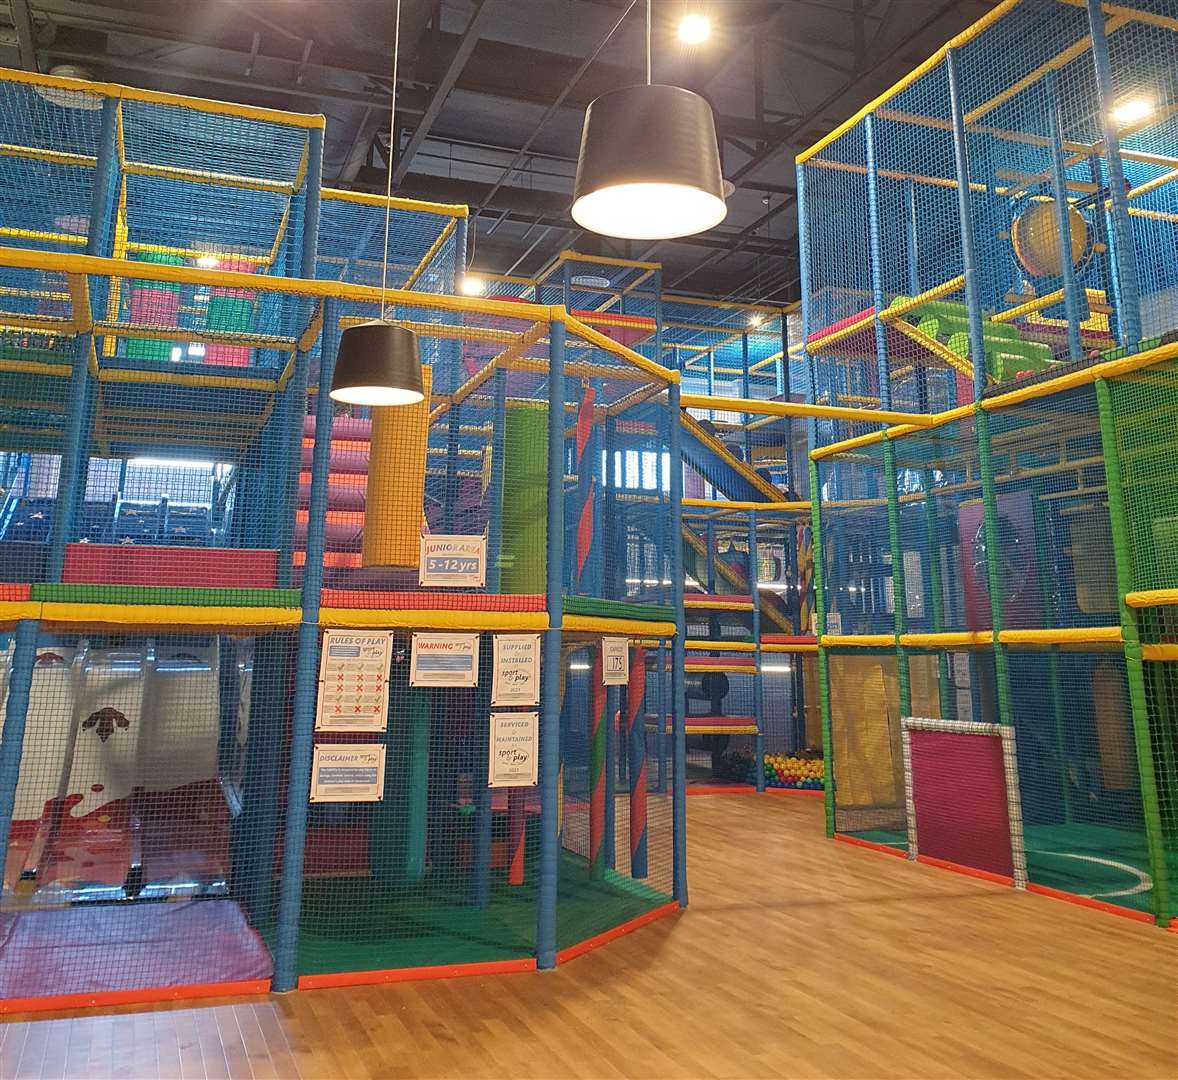 The soft play at the Stour Centre in Ashford